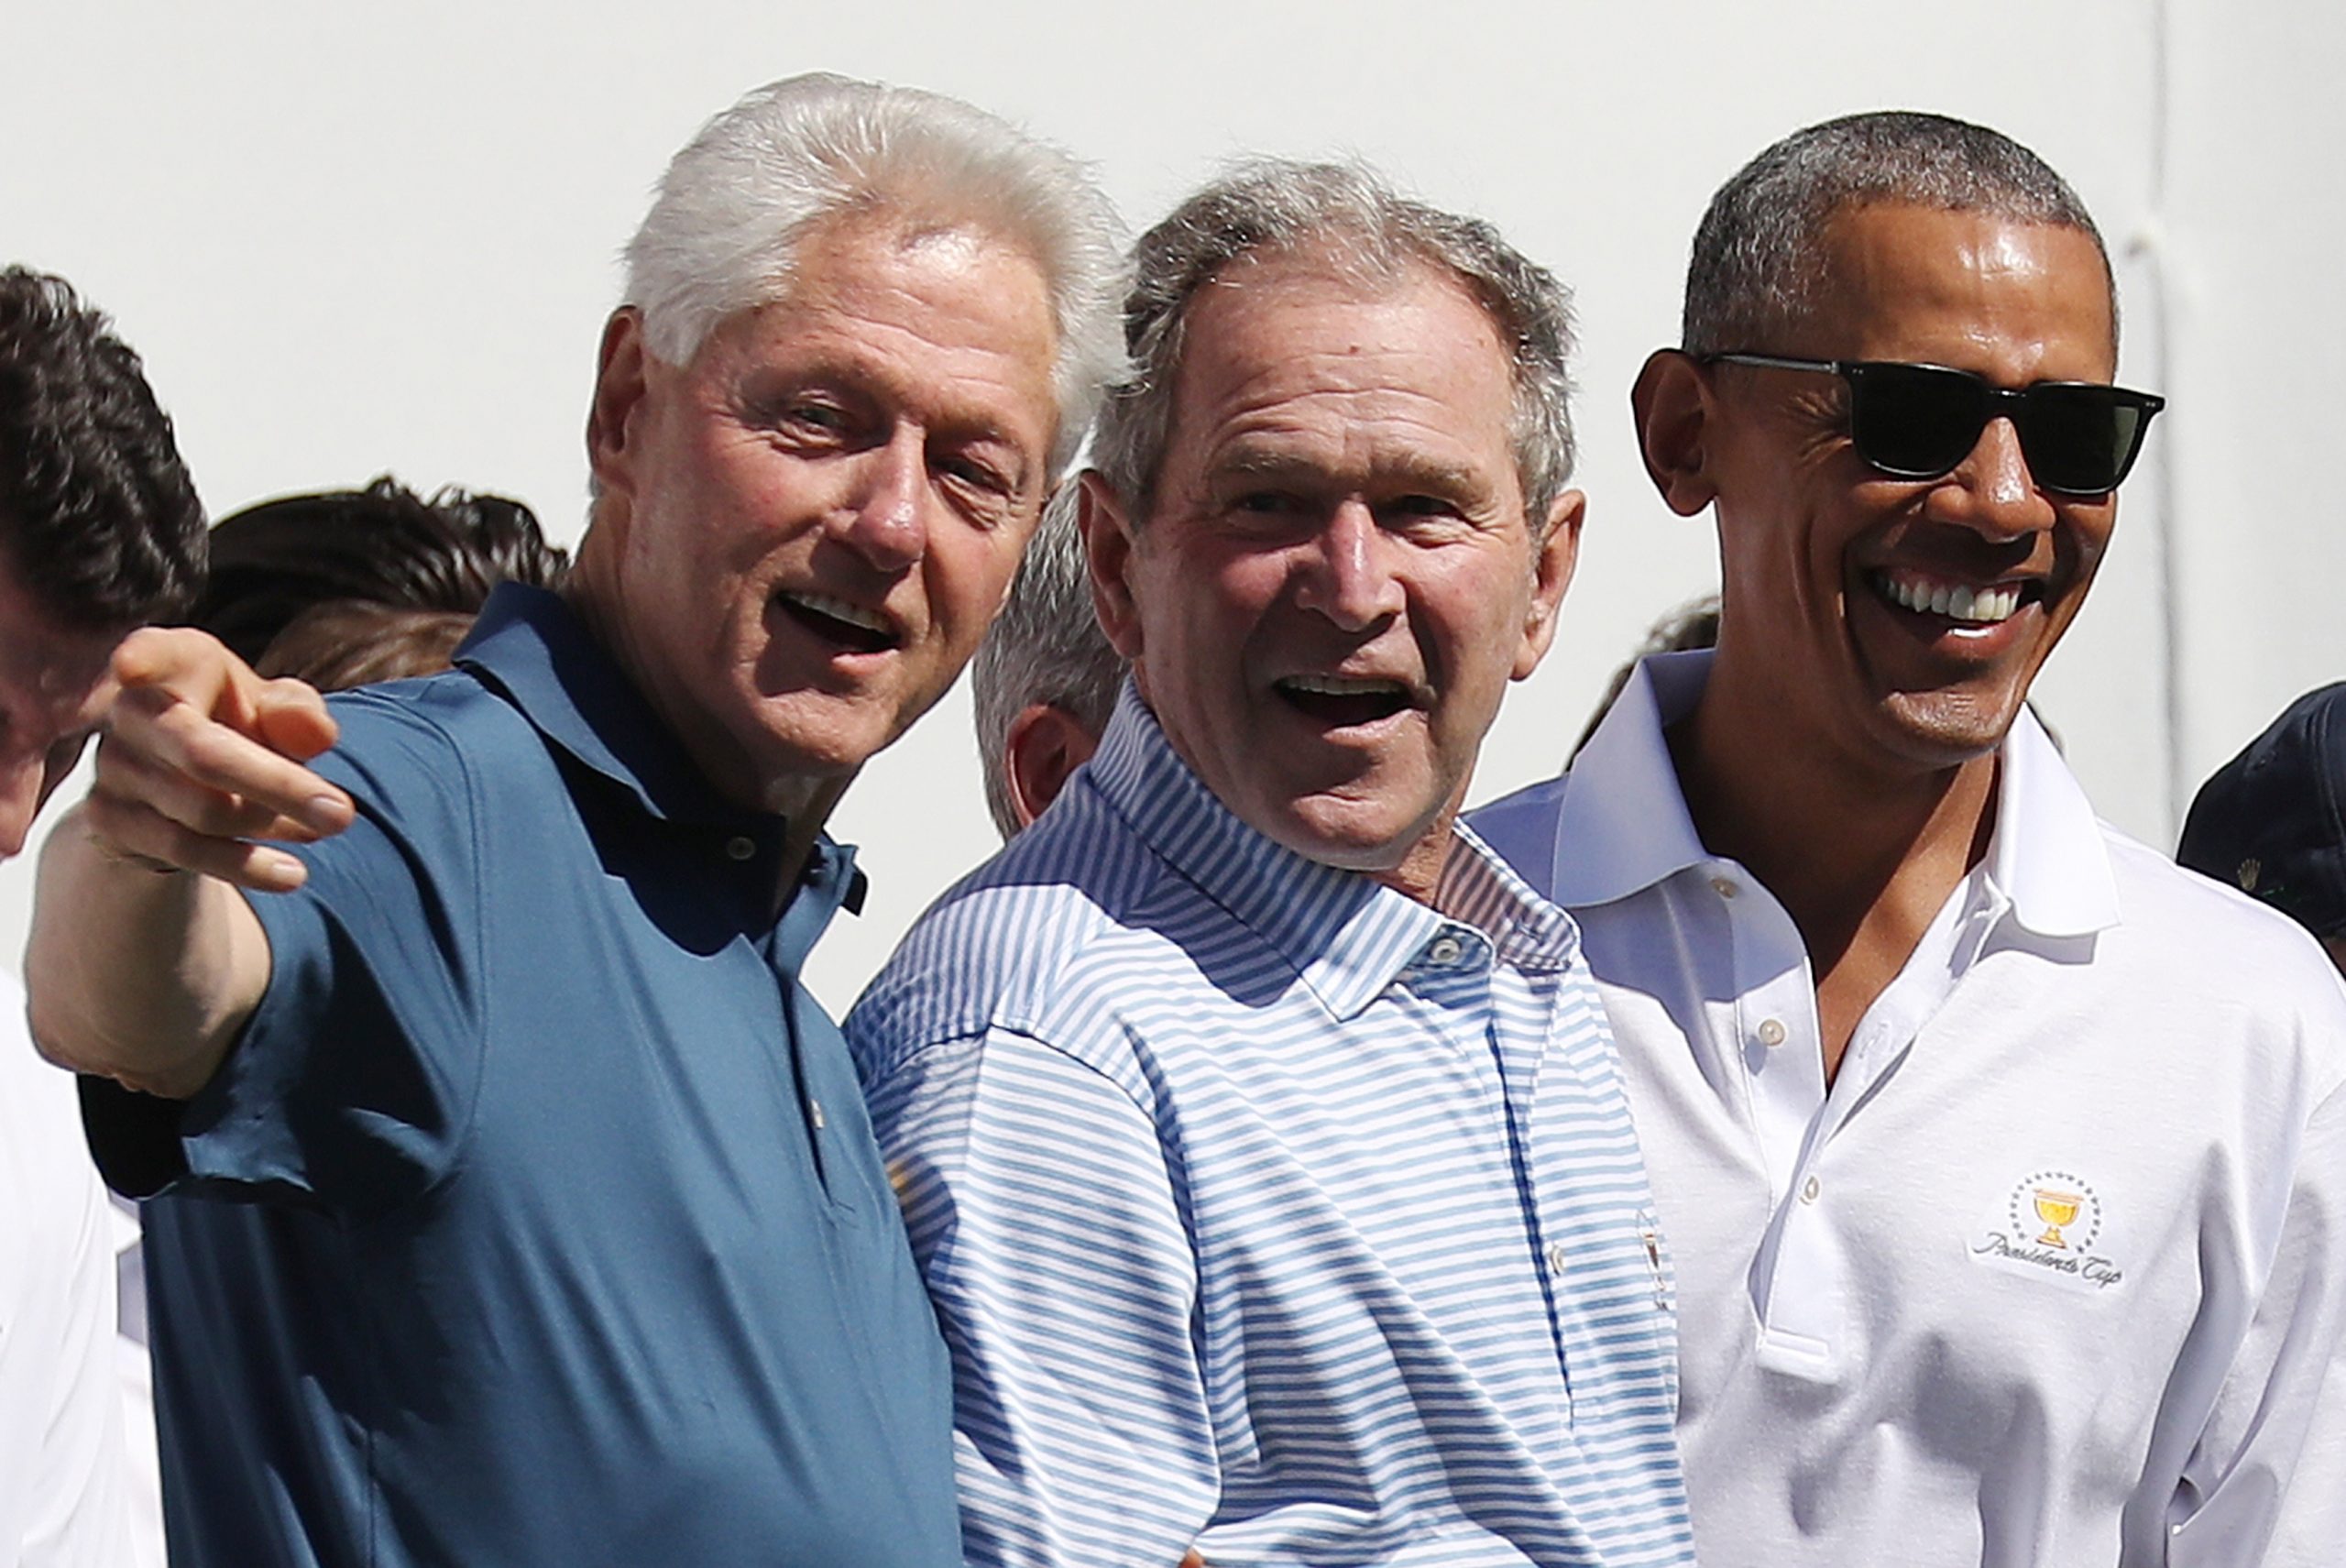 epa08859435 (FILE) - Former US Presidents Bill Clinton (L), George W. Bush (C) and Barack Obama during opening ceremonies for the 2017 Presidents Cup at Liberty National Golf Club in Jersey City, New Jersey, USA, 28 September 2017 (reissued 03 December 2020). According to media reports, the three former presidents will volunteer to get a Covid-19 vaccination publicly in order to promote the safety of the upcoming coronavirus vaccine.  EPA/ANDREW GOMBERT *** Local Caption *** 53796188